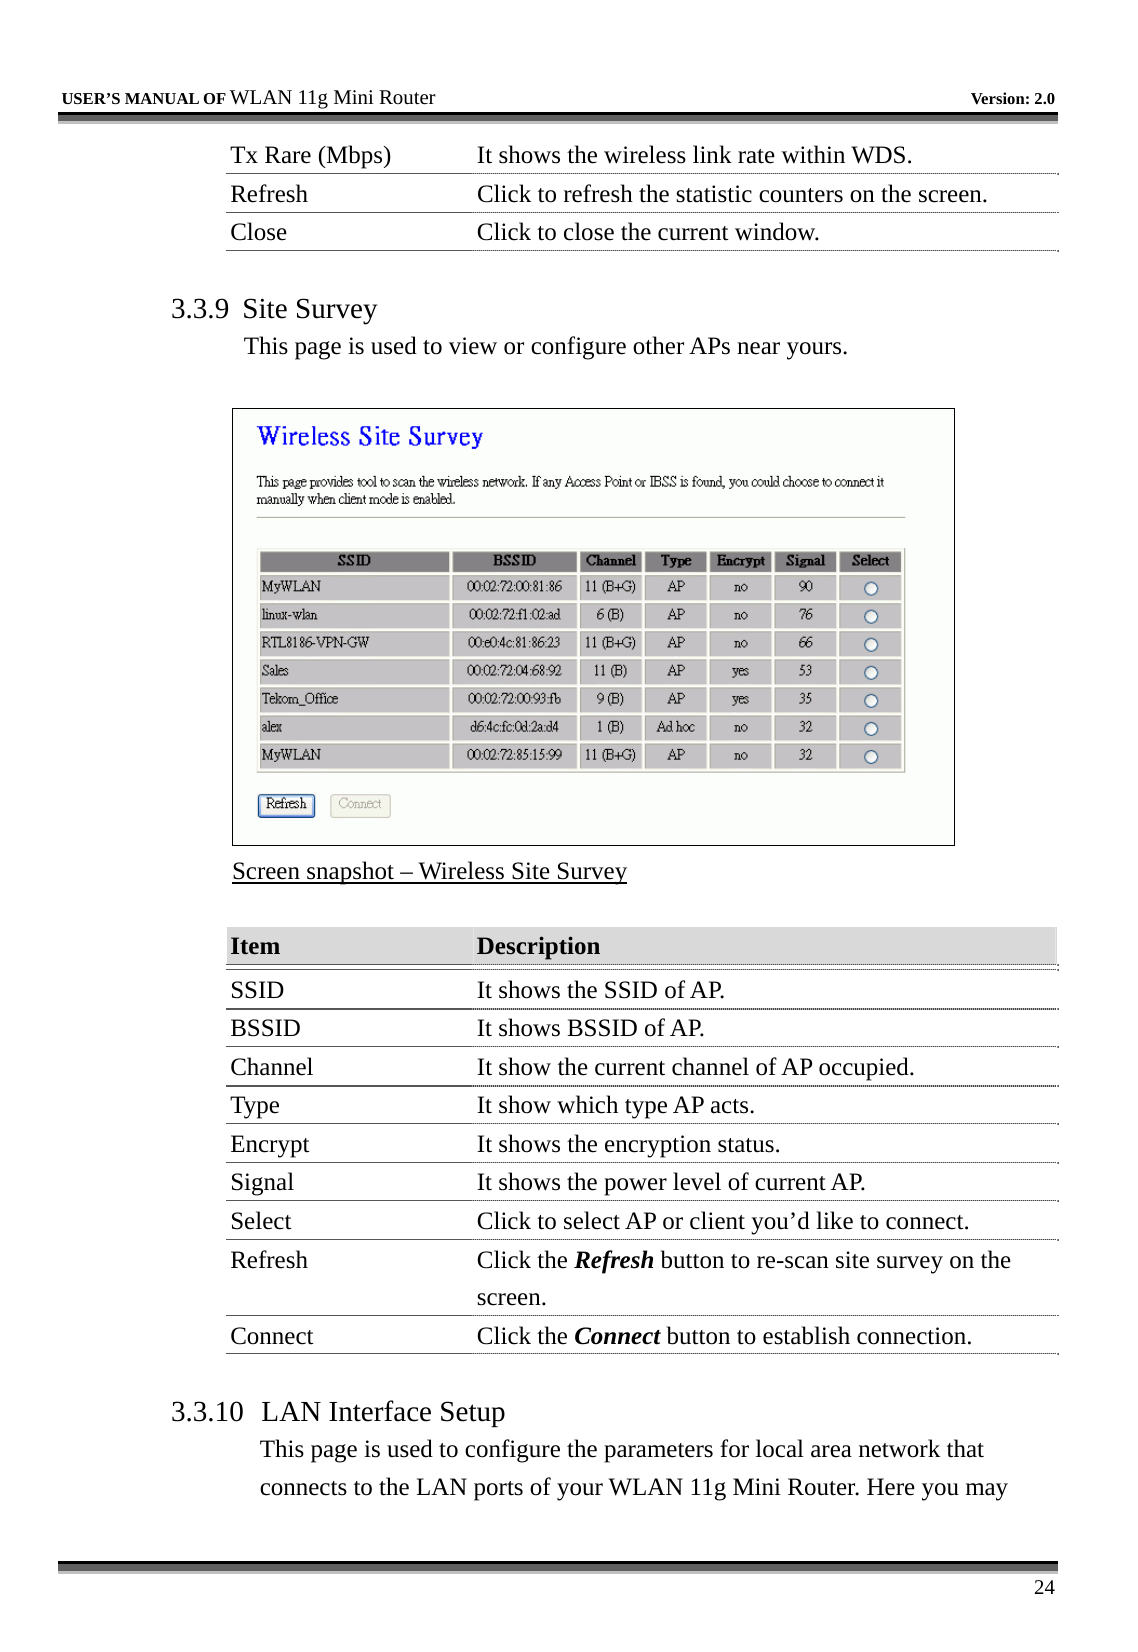   USER’S MANUAL OF WLAN 11g Mini Router   Version: 2.0     24 Tx Rare (Mbps)  It shows the wireless link rate within WDS. Refresh  Click to refresh the statistic counters on the screen. Close  Click to close the current window.  3.3.9 Site Survey This page is used to view or configure other APs near yours.   Screen snapshot – Wireless Site Survey  Item  Description   SSID  It shows the SSID of AP. BSSID  It shows BSSID of AP. Channel  It show the current channel of AP occupied. Type  It show which type AP acts. Encrypt  It shows the encryption status. Signal  It shows the power level of current AP. Select  Click to select AP or client you’d like to connect. Refresh Click the Refresh button to re-scan site survey on the screen. Connect Click the Connect button to establish connection.  3.3.10  LAN Interface Setup This page is used to configure the parameters for local area network that connects to the LAN ports of your WLAN 11g Mini Router. Here you may 